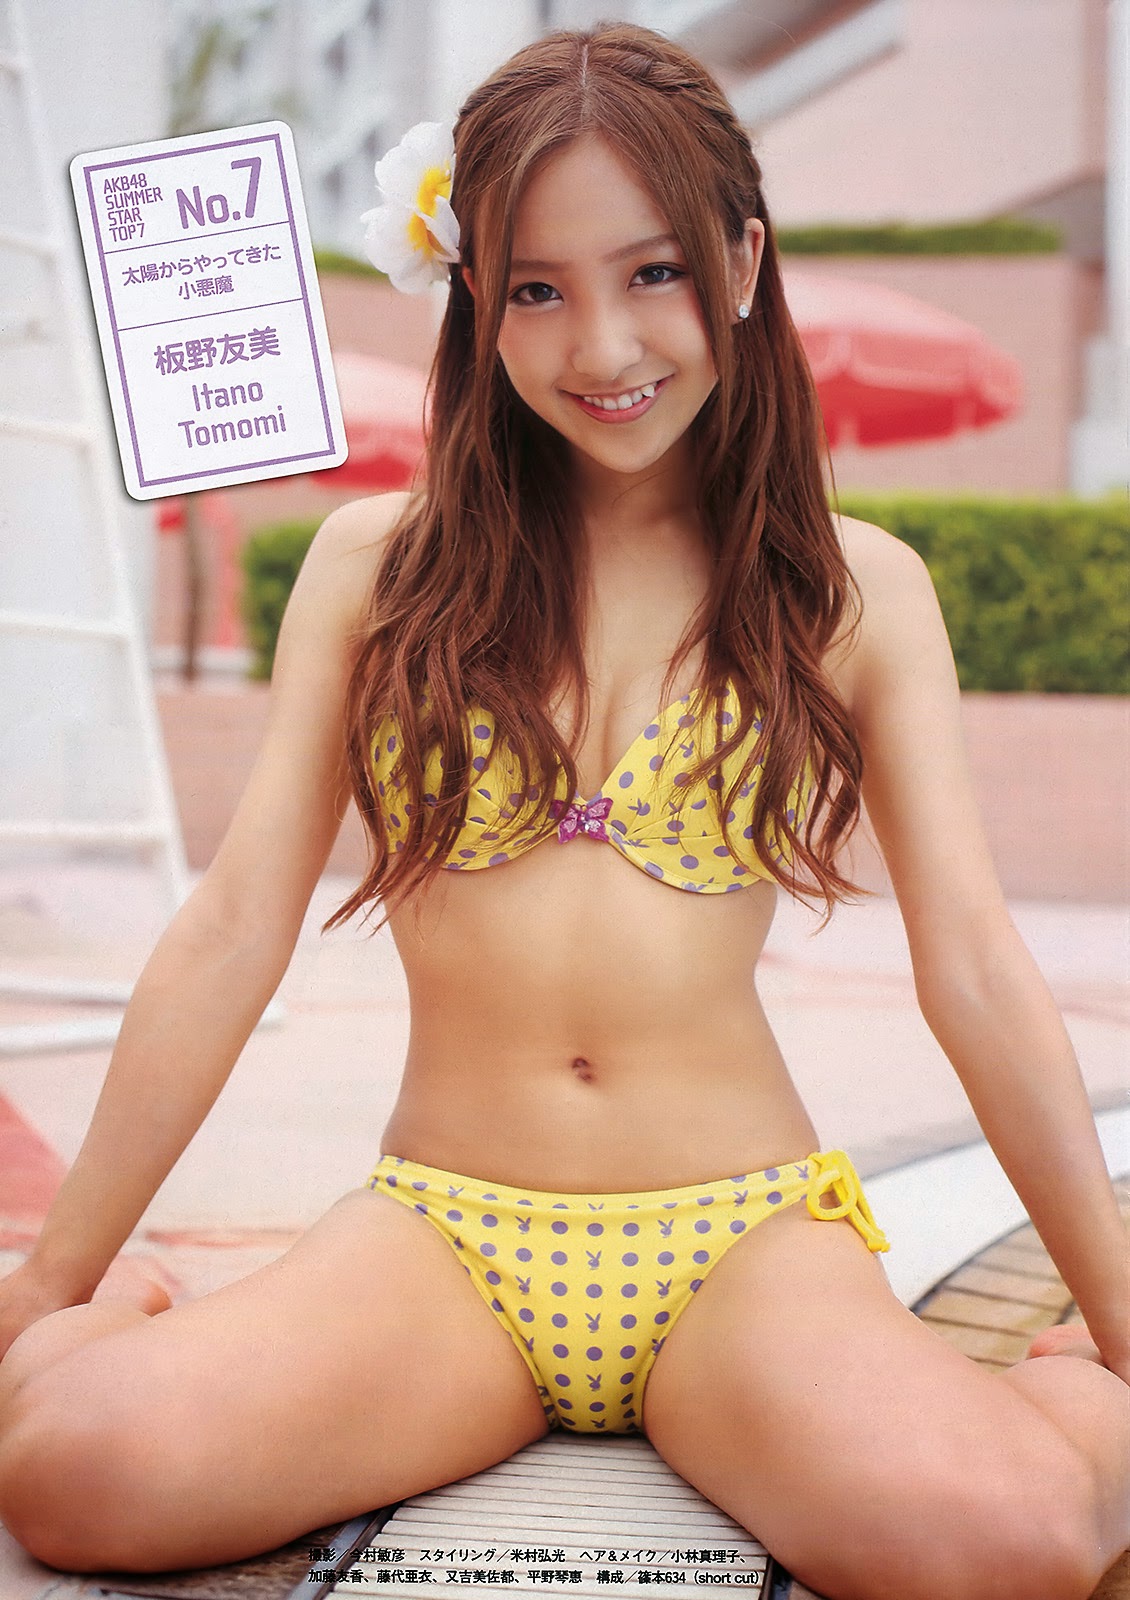 AKB48 Itano Tomomi 板野友美 Weekly Playboy No 36 2009 Pictures